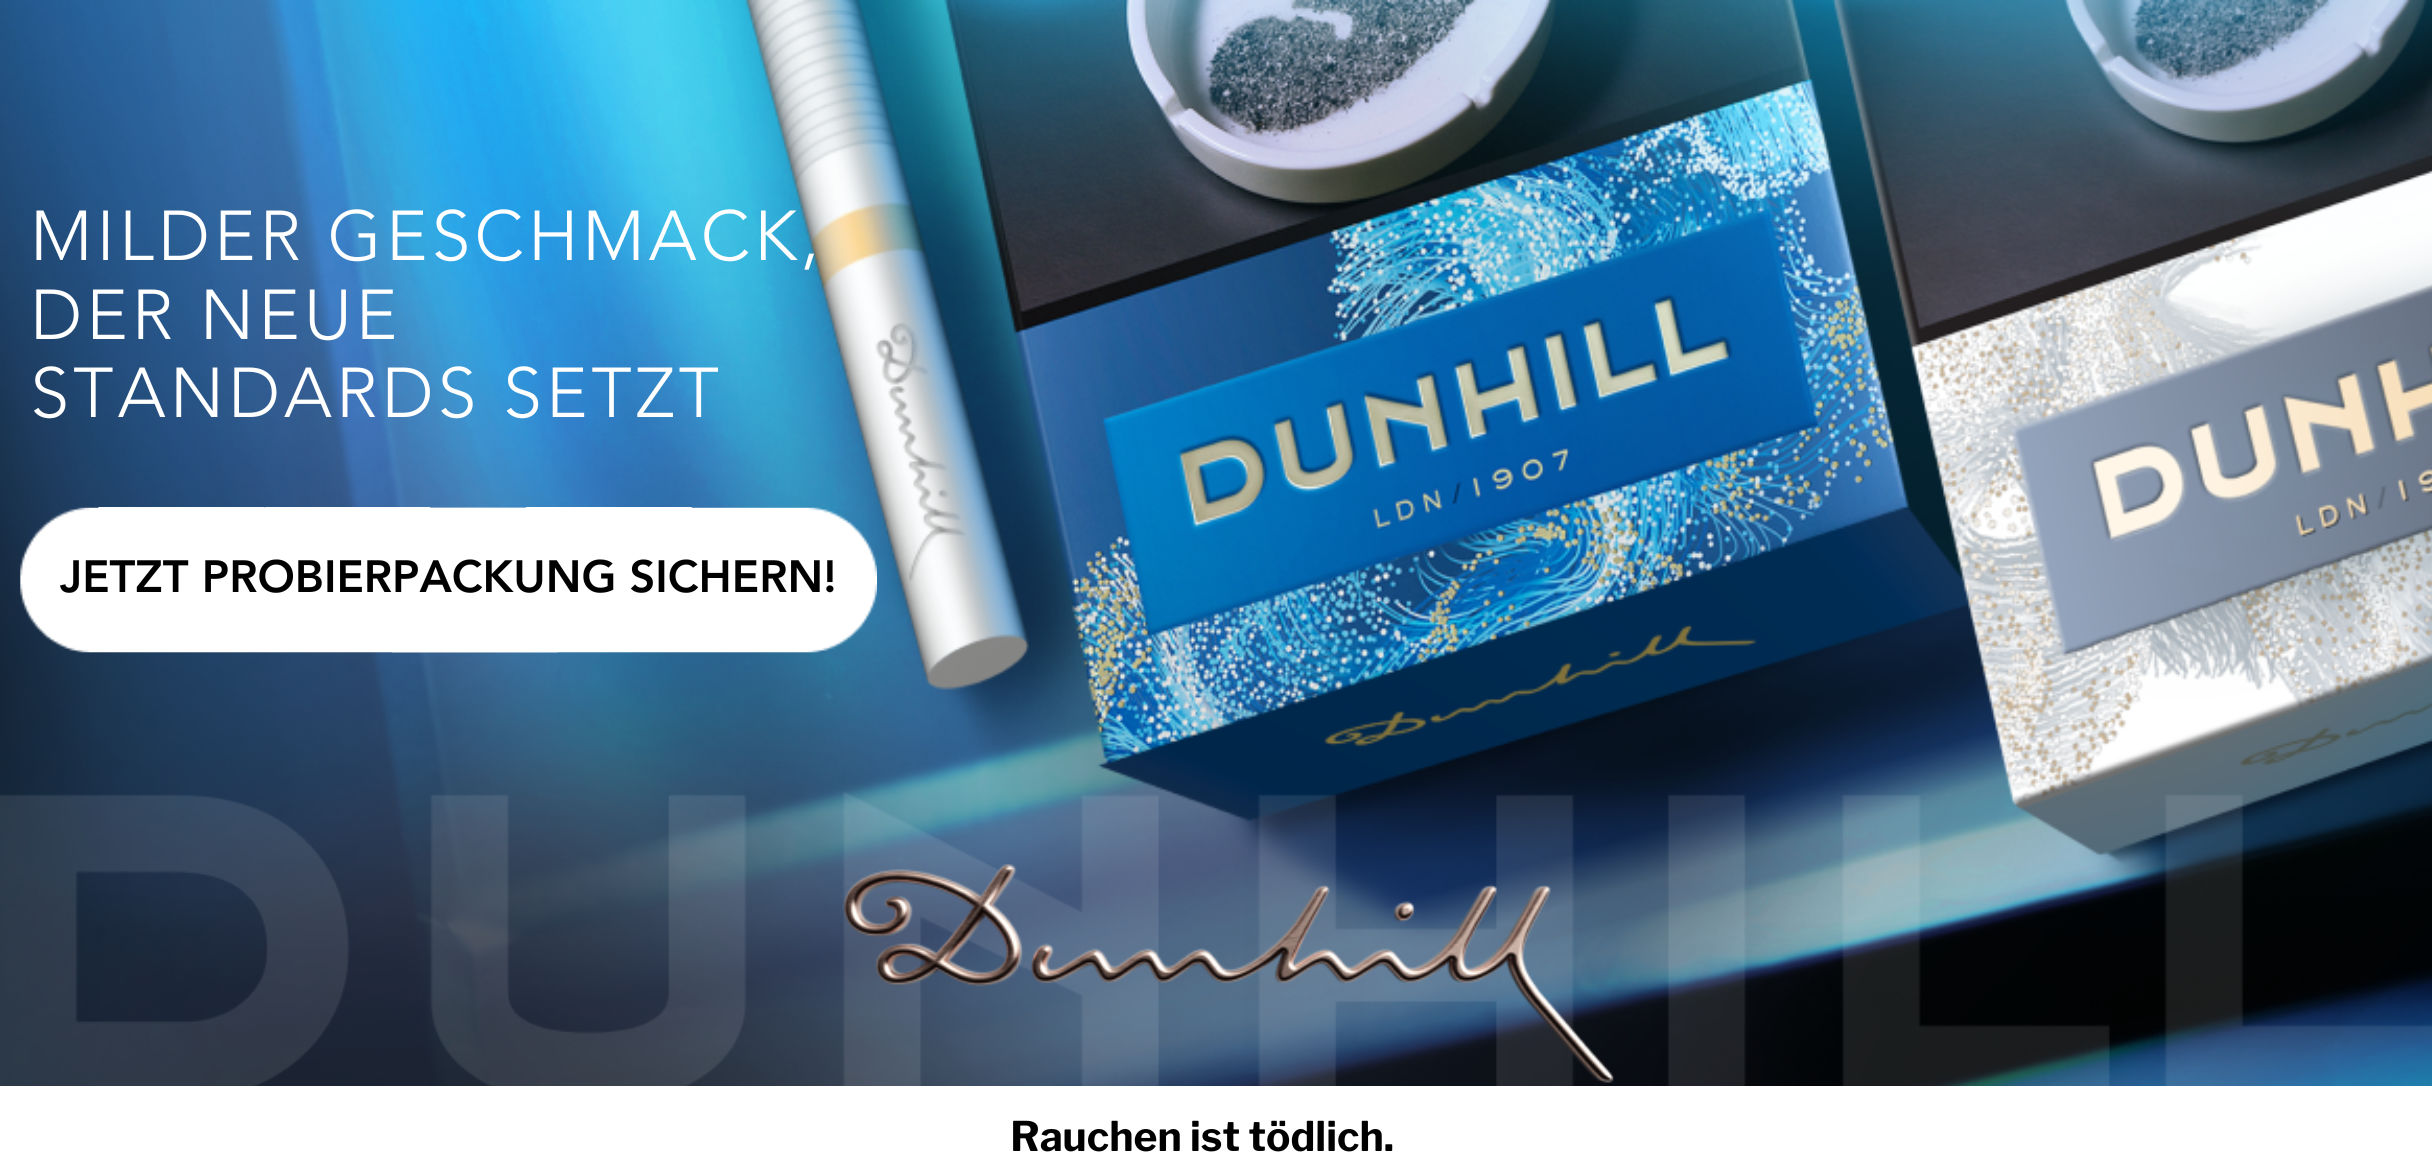 Dunhill Probierpackung